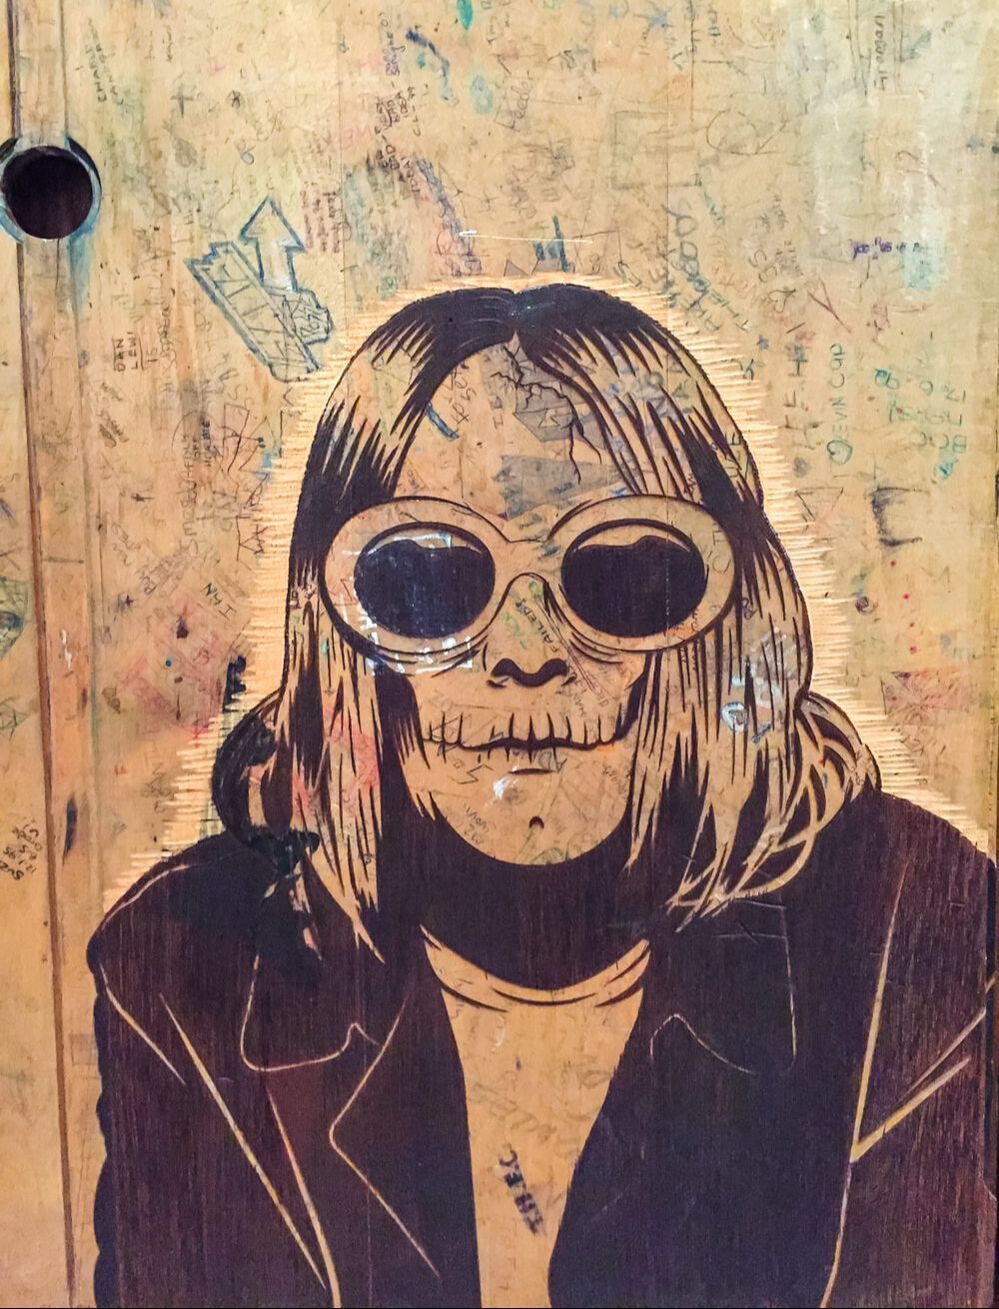 Singapore: Art From The Streets Exhibition at the ArtScience Museum - Kurt Cobain detail of Retired Stencil Cluster - D*Face - 2000-2017.